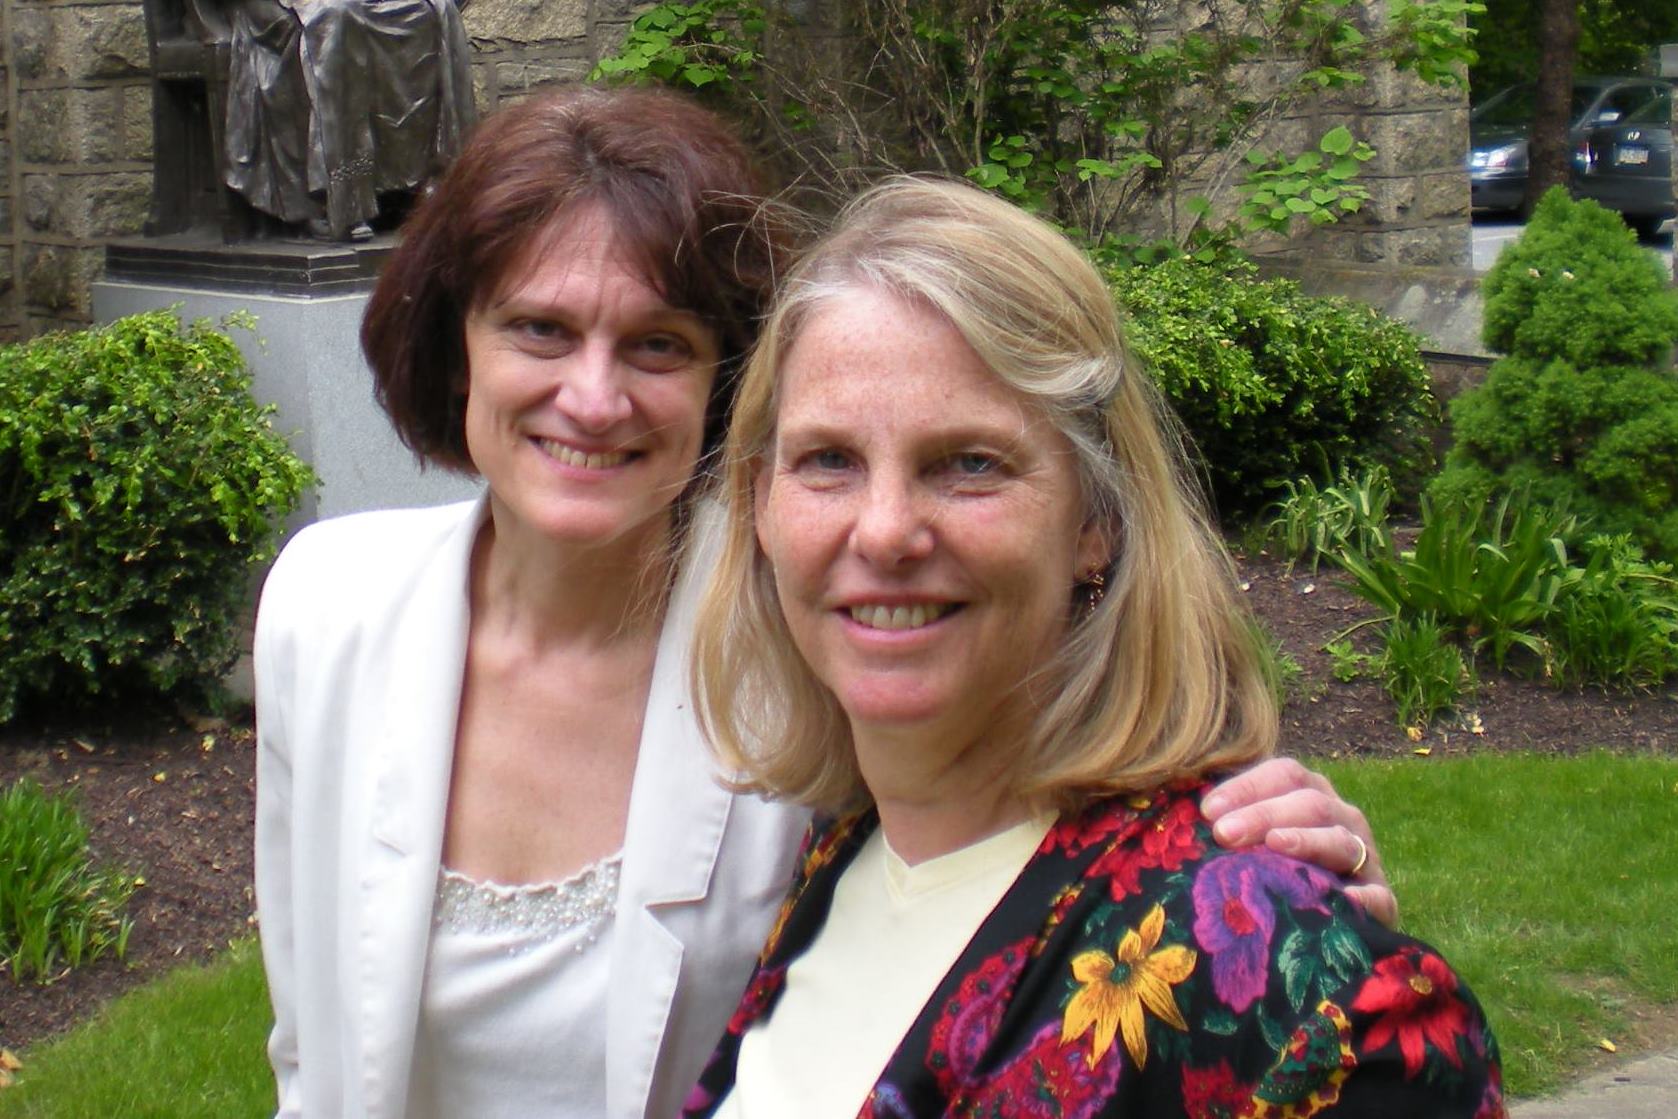 From left, Lisa Lonie and Janet Tebbel